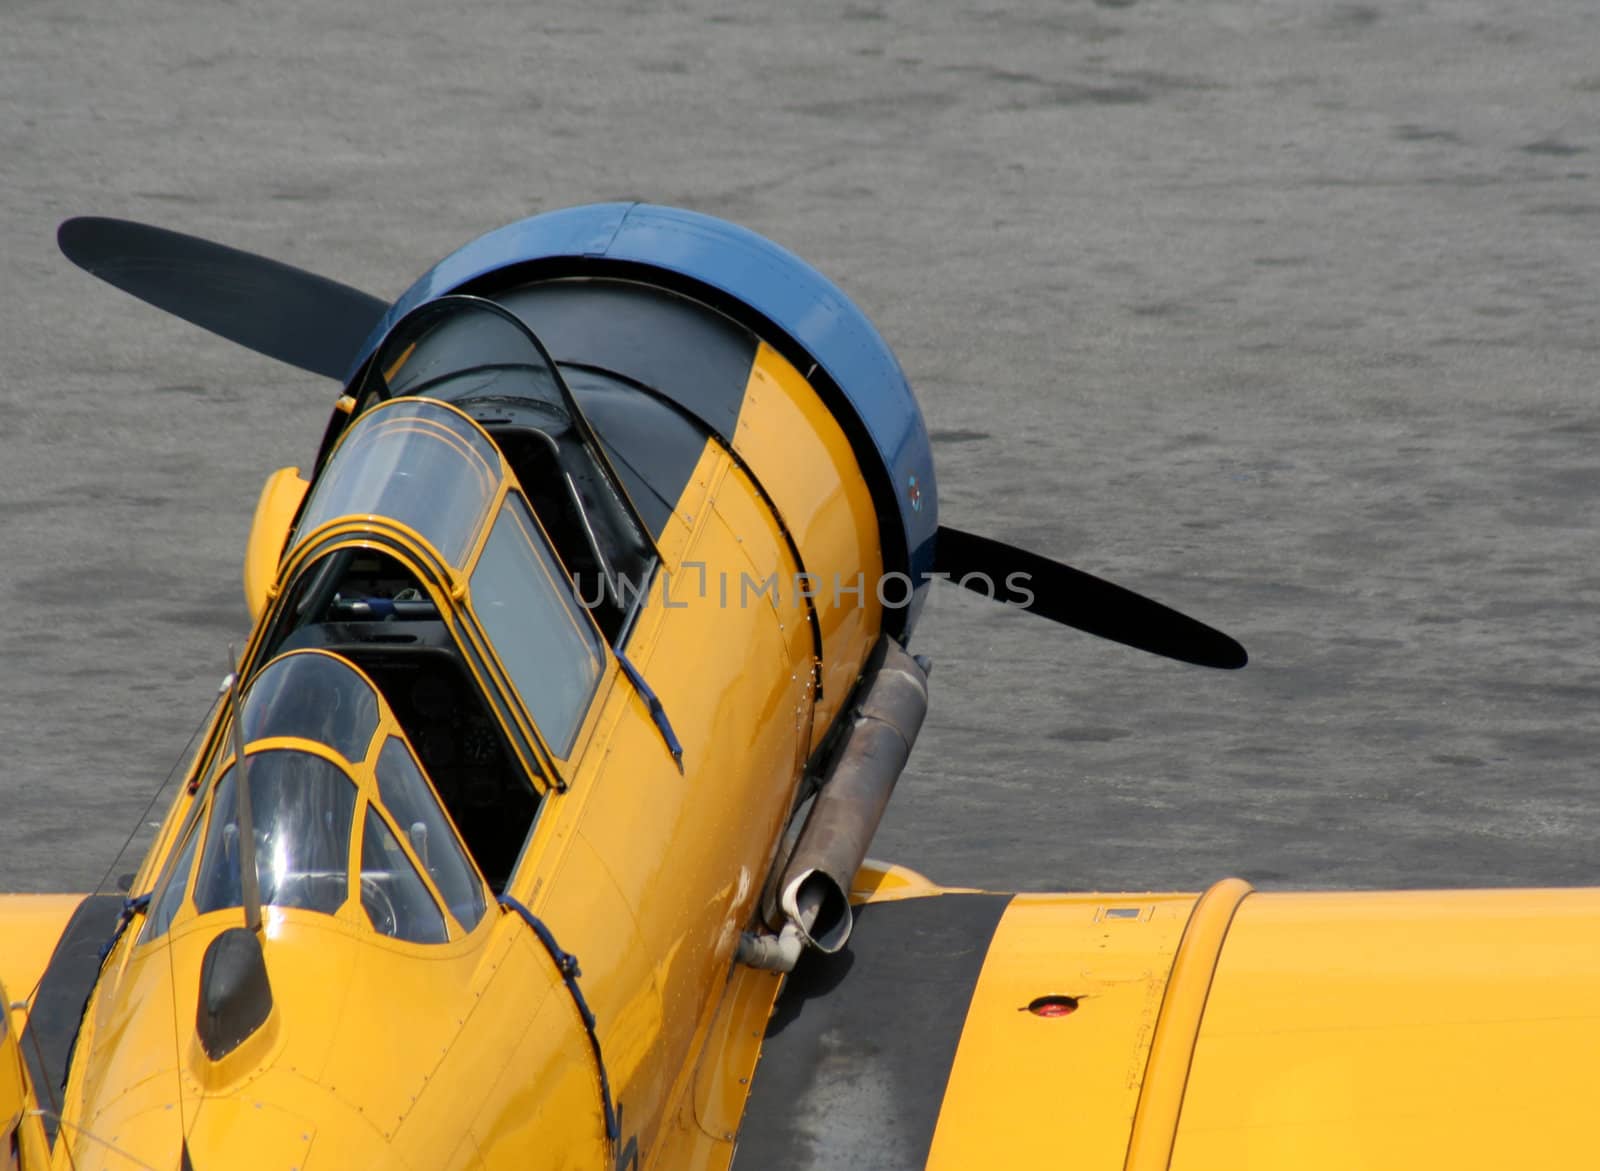 A yellow antique fighter plane.